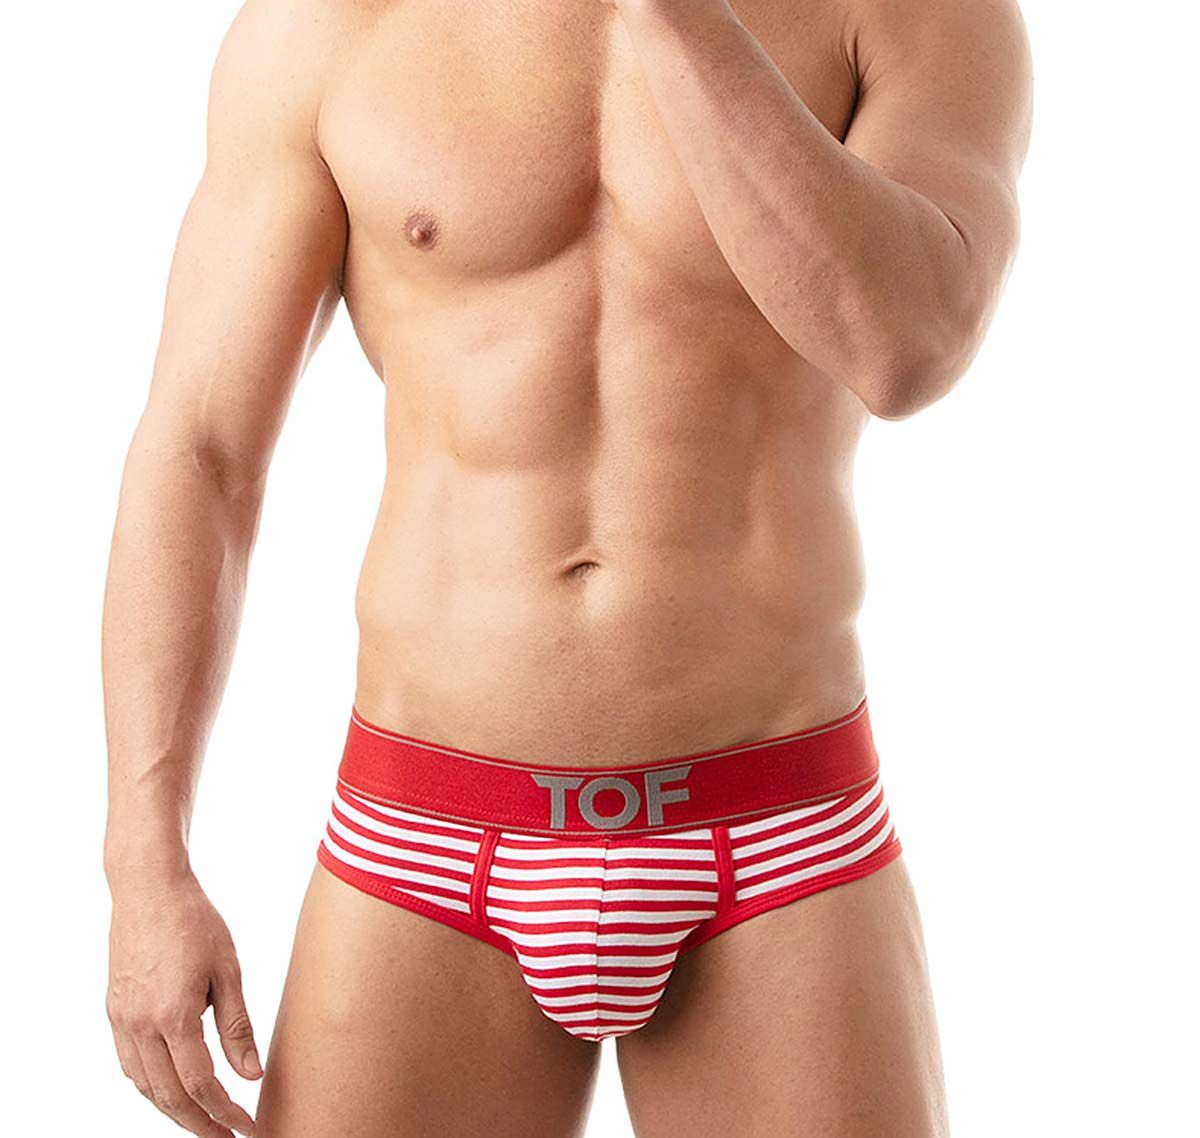 TOF Brief SAILOR BRIEFS RED TOF224R, red